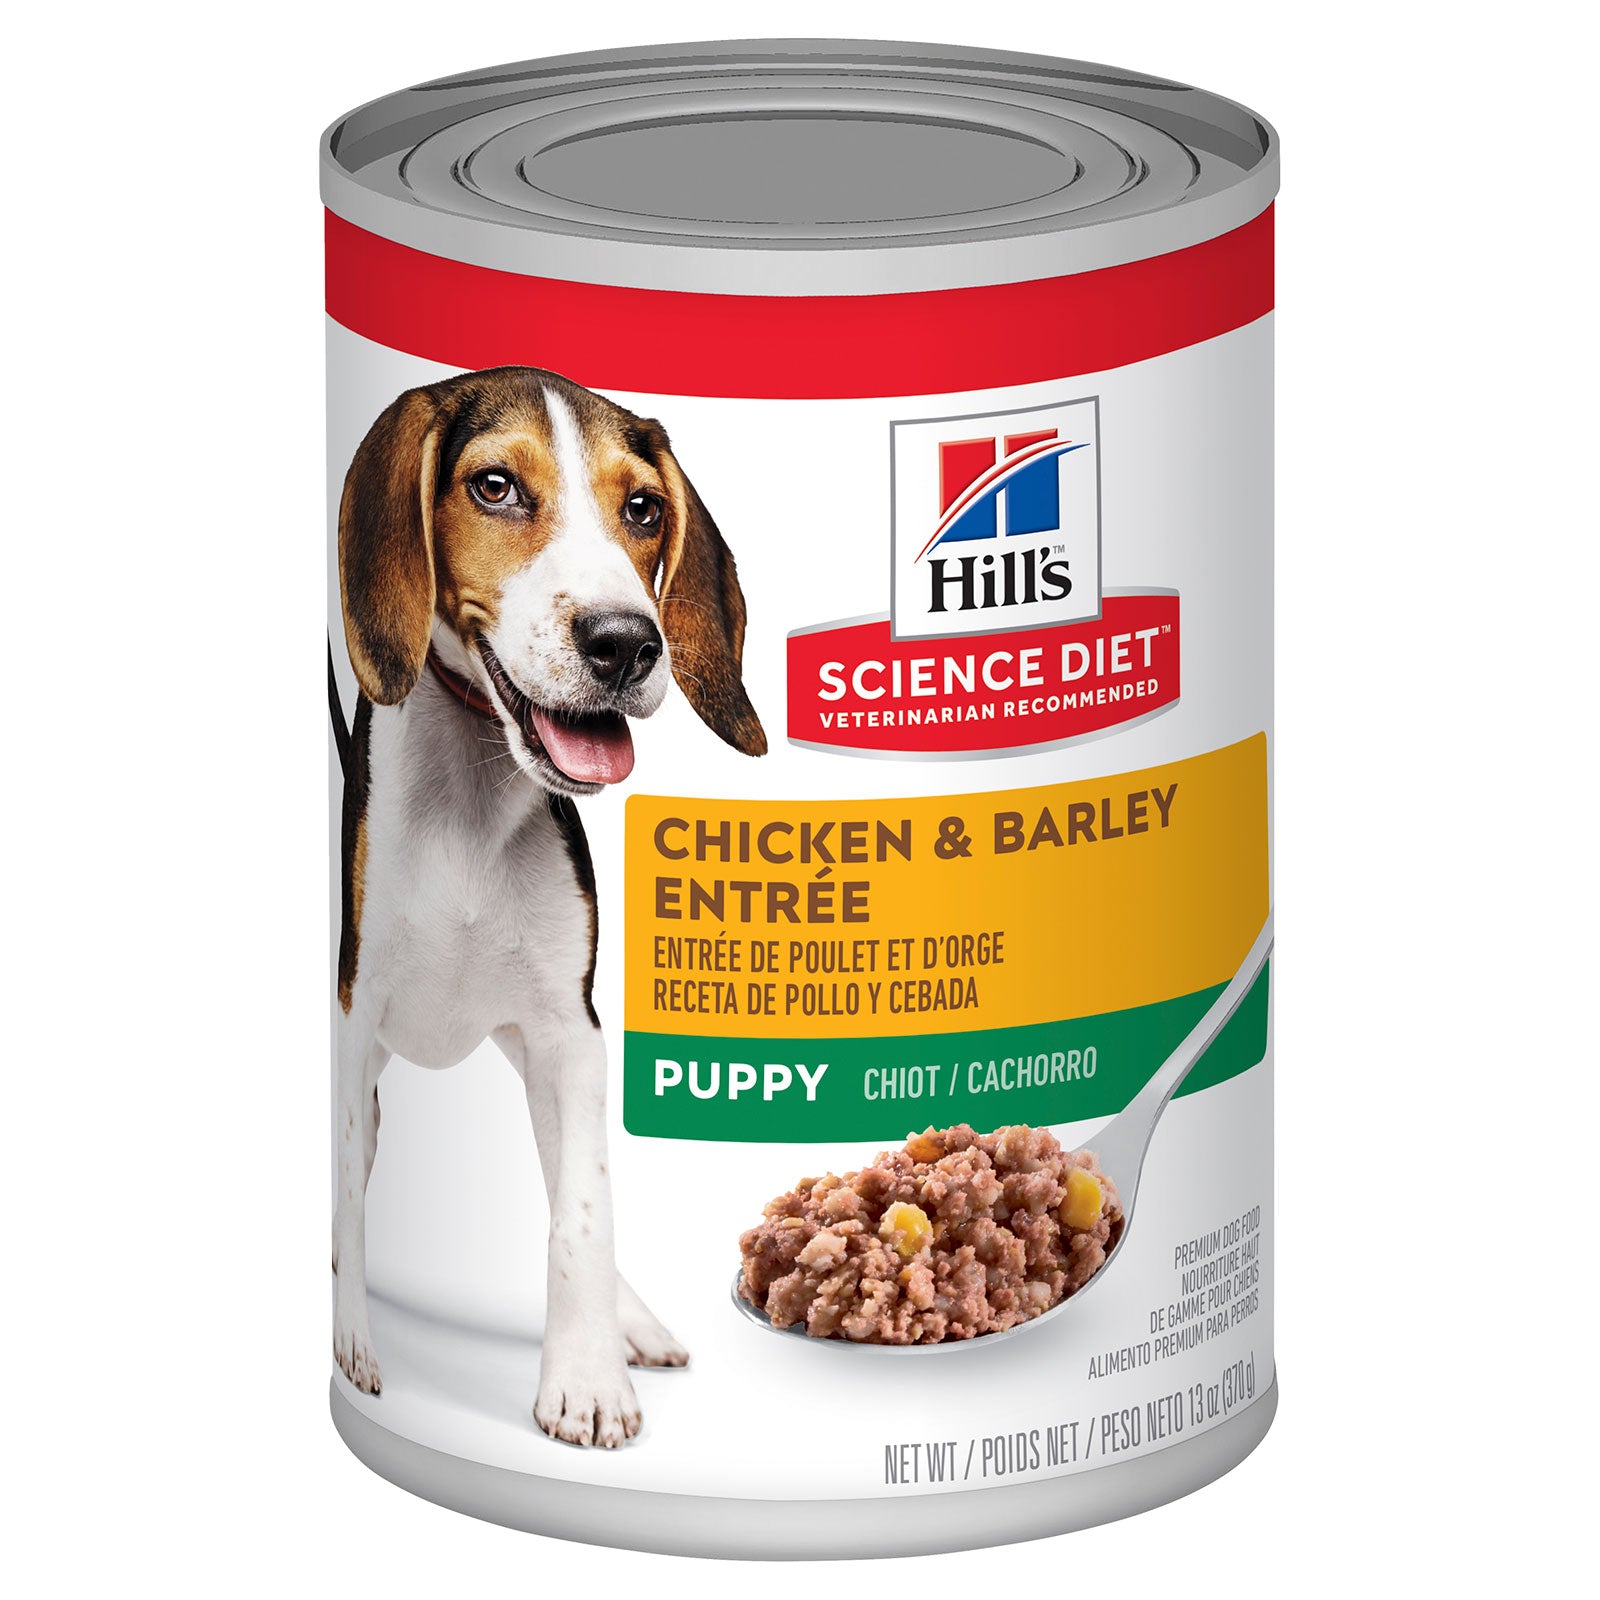 Hill's Science Diet Dog Food Can Puppy Chicken & Barley Entrée